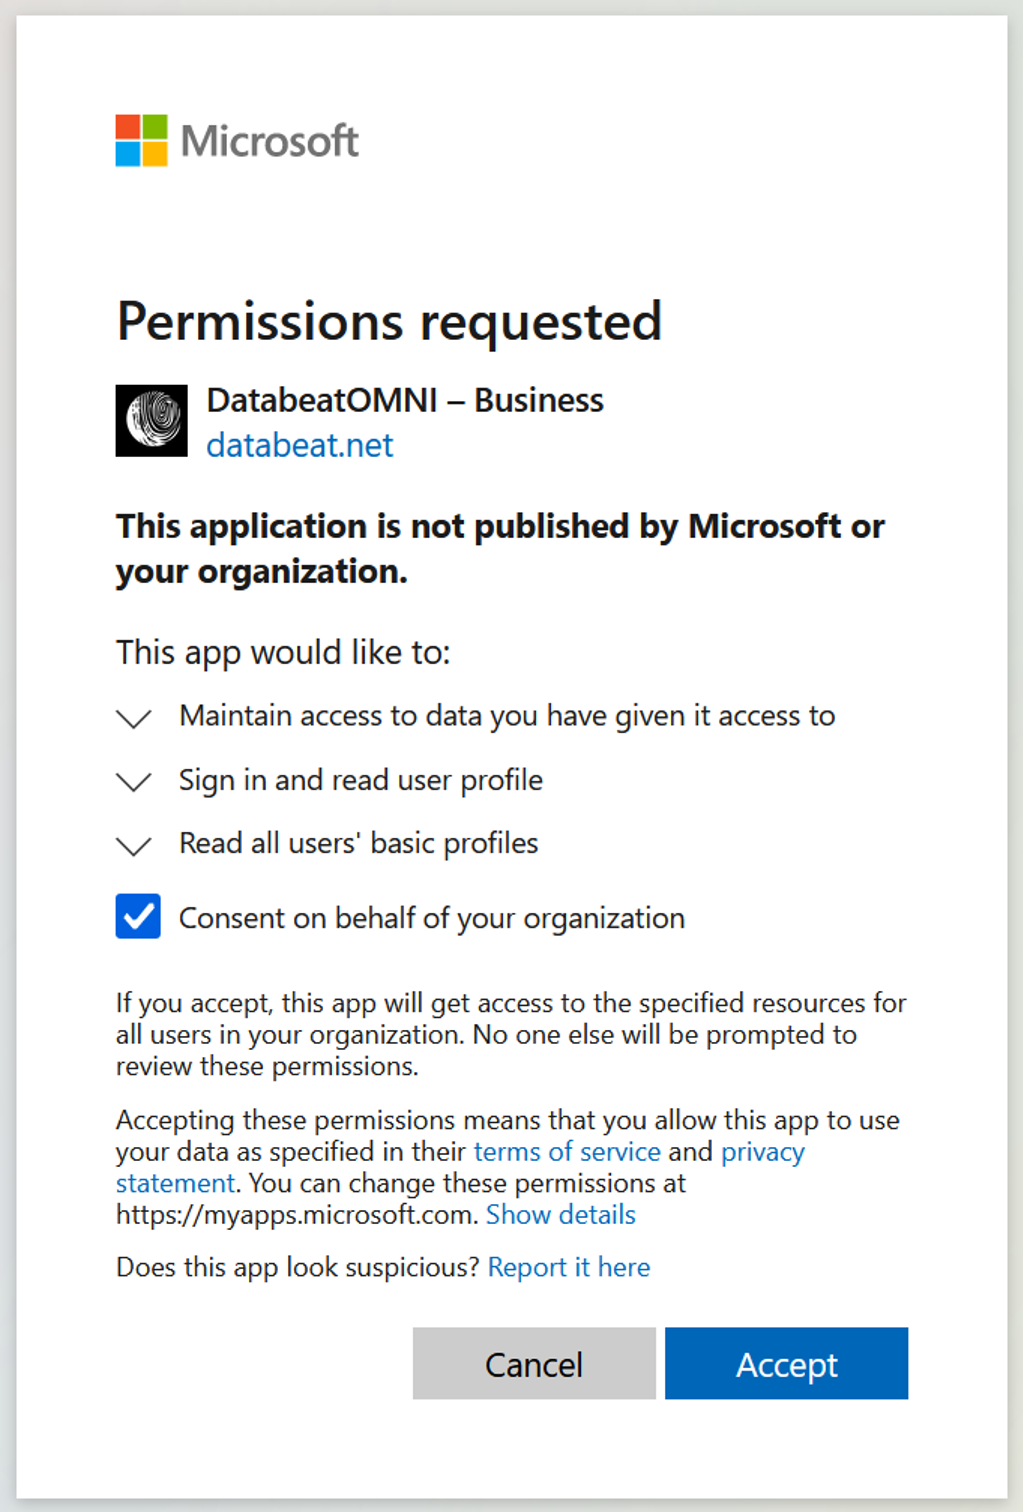 DatabeatOMNI Enterprise application - Sign in permissions requested by Microsoft